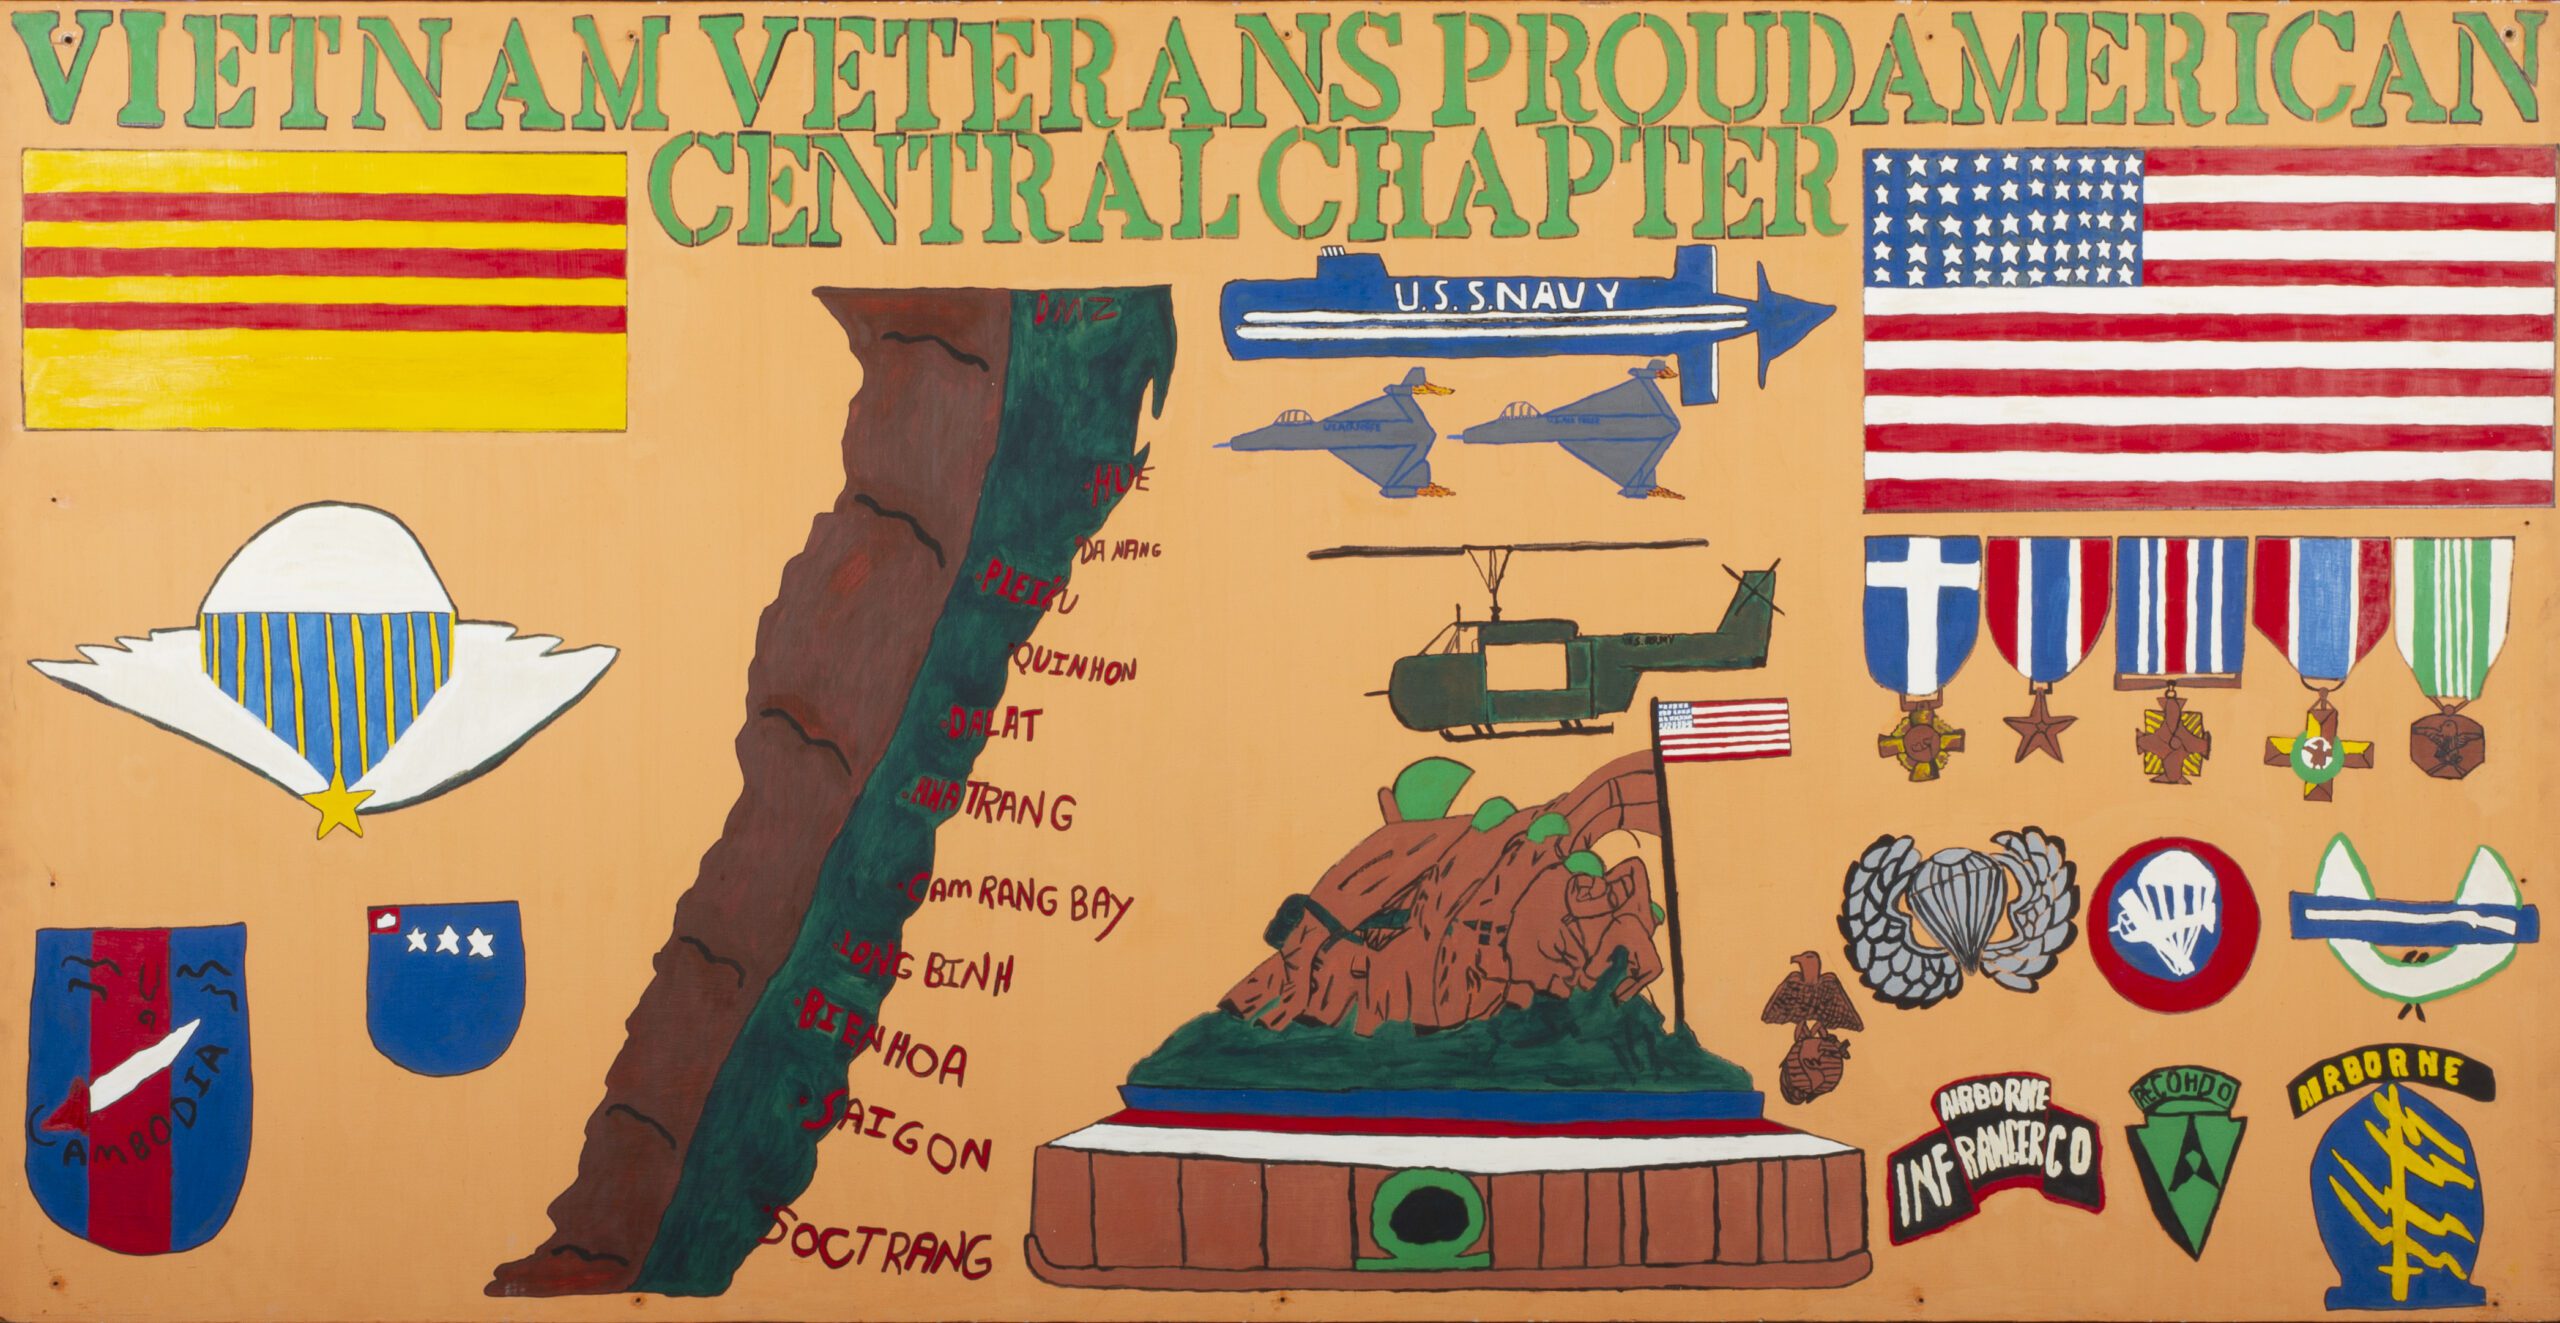 Acrylic painting on a plywood sheet was made in Columbus, Ohio, by Harry Edwards around 1981. The painting has a orange background. At the top in green is text 'VIETNAM VETERANS PROUD AMERICAN / CENTRAL CHAPTER." 